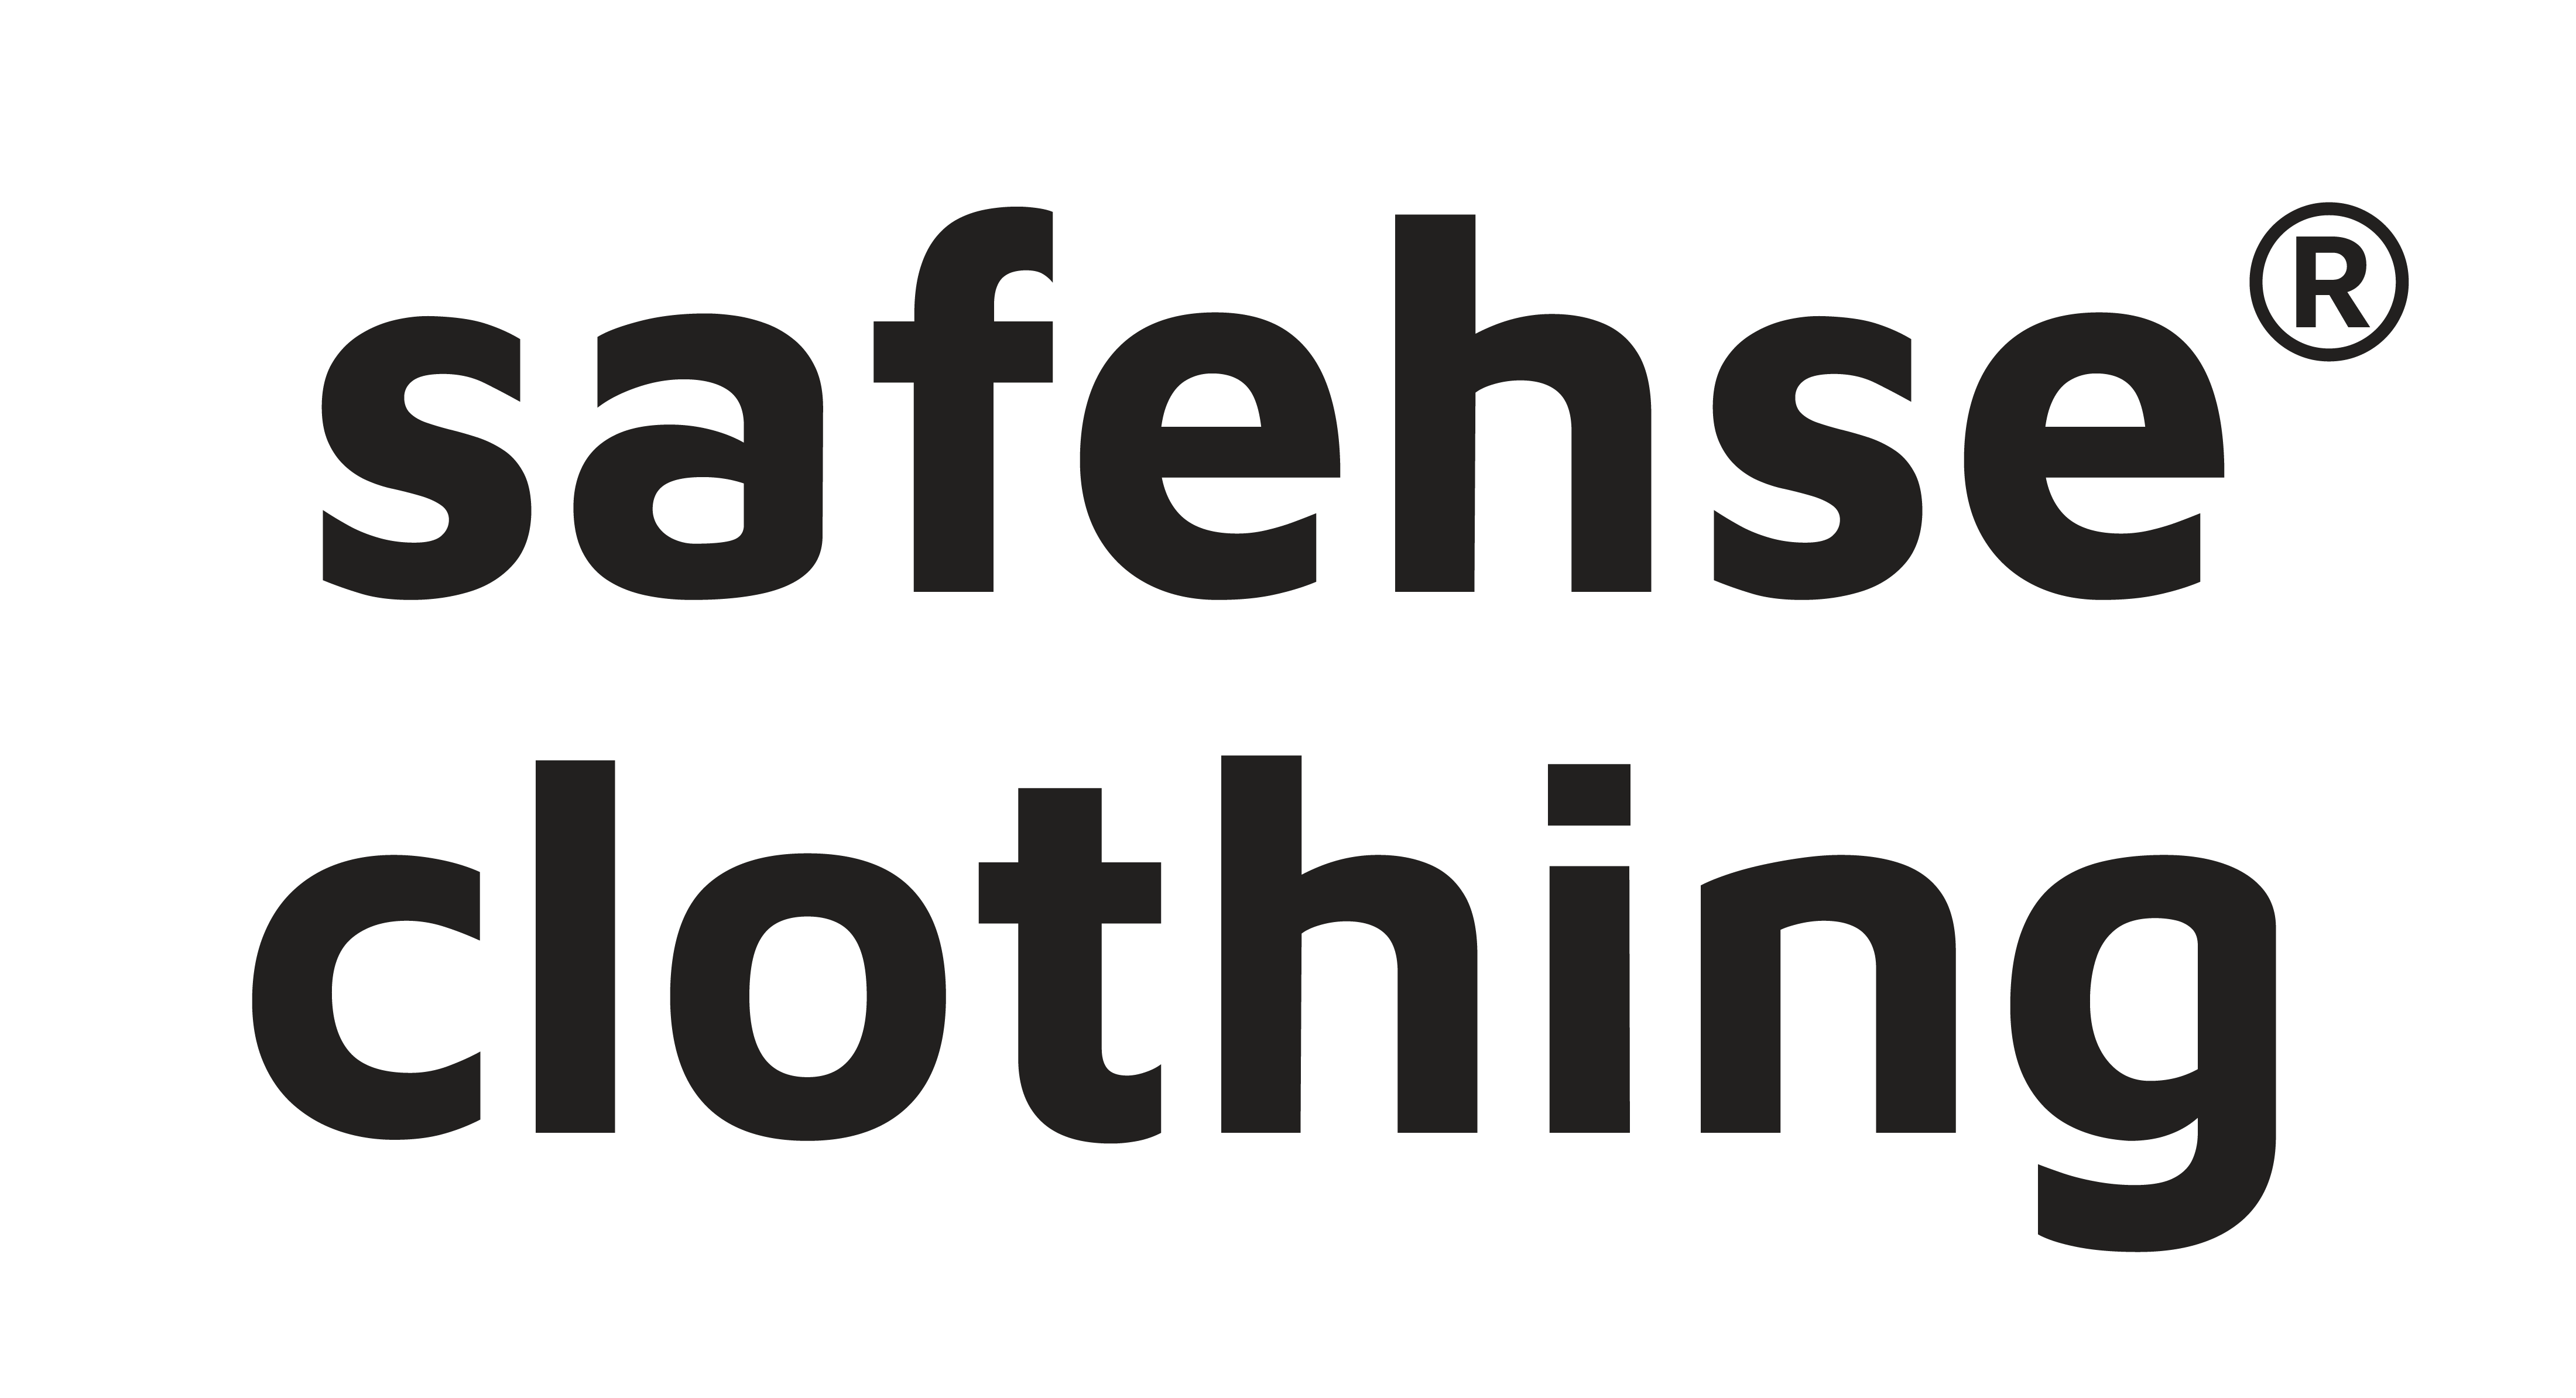 Safehse Clothing